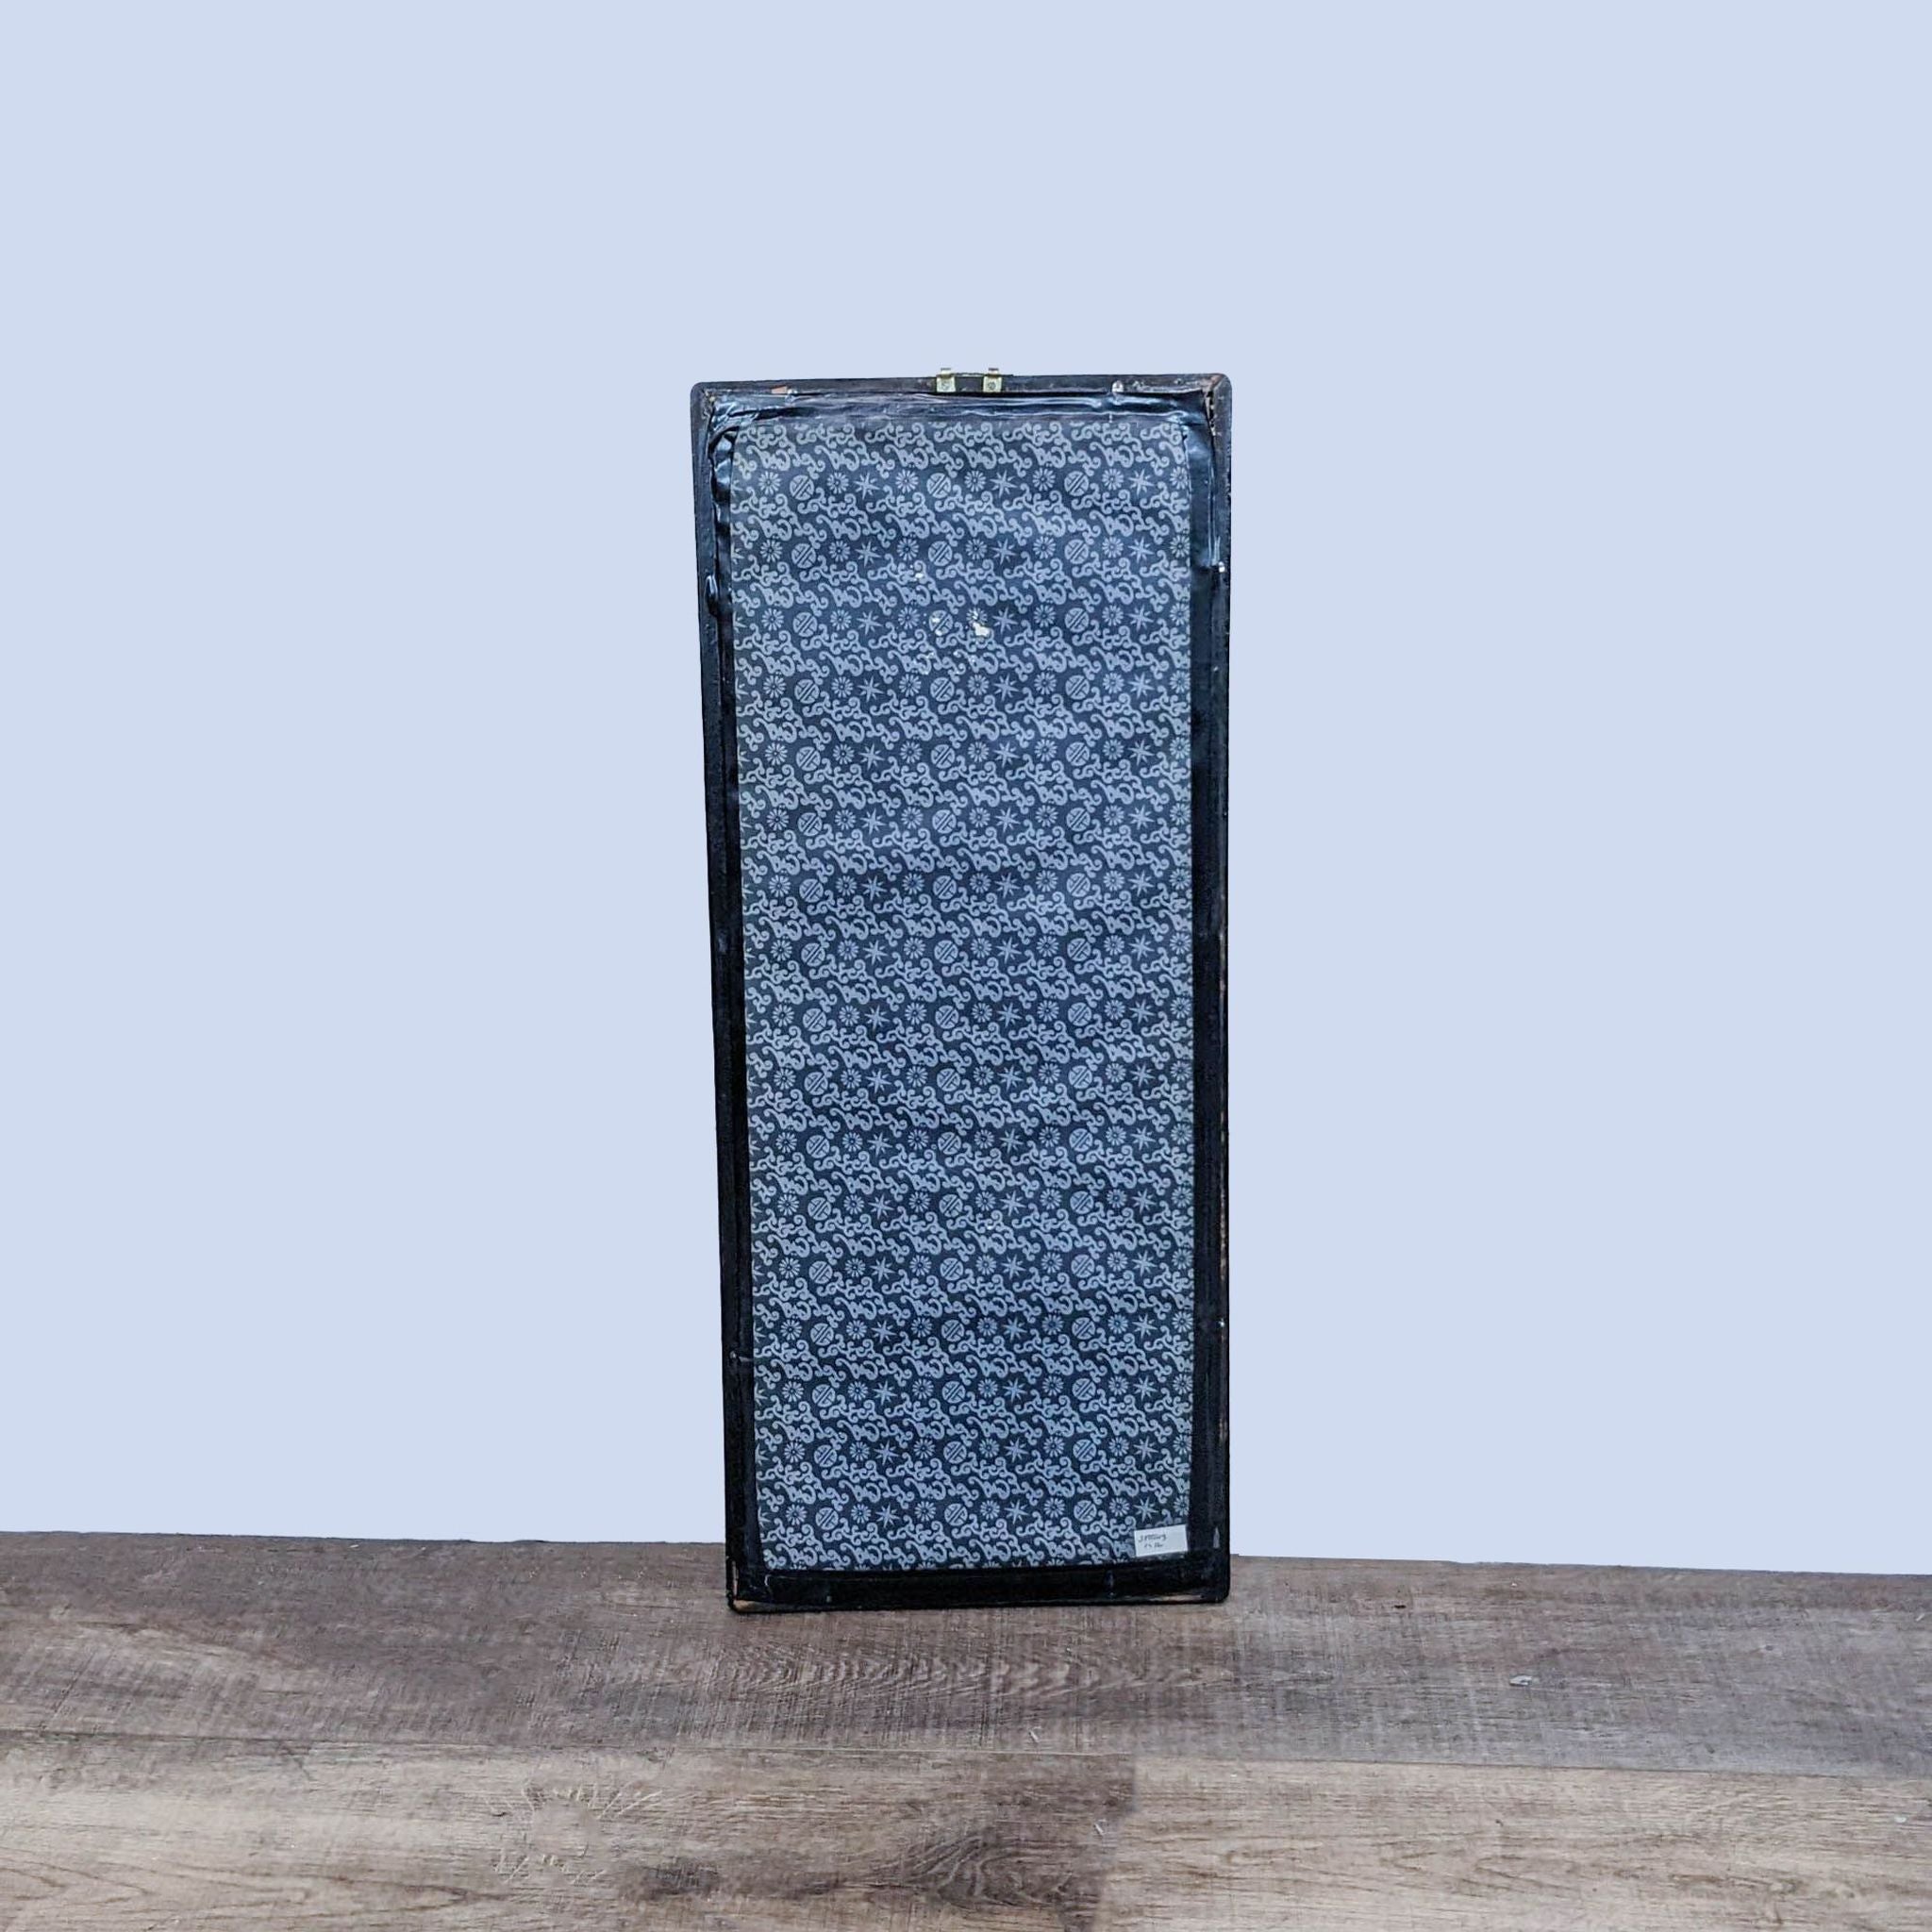 Rectangular floral-patterned clutch purse by Reperch on a wooden surface against a light blue background.